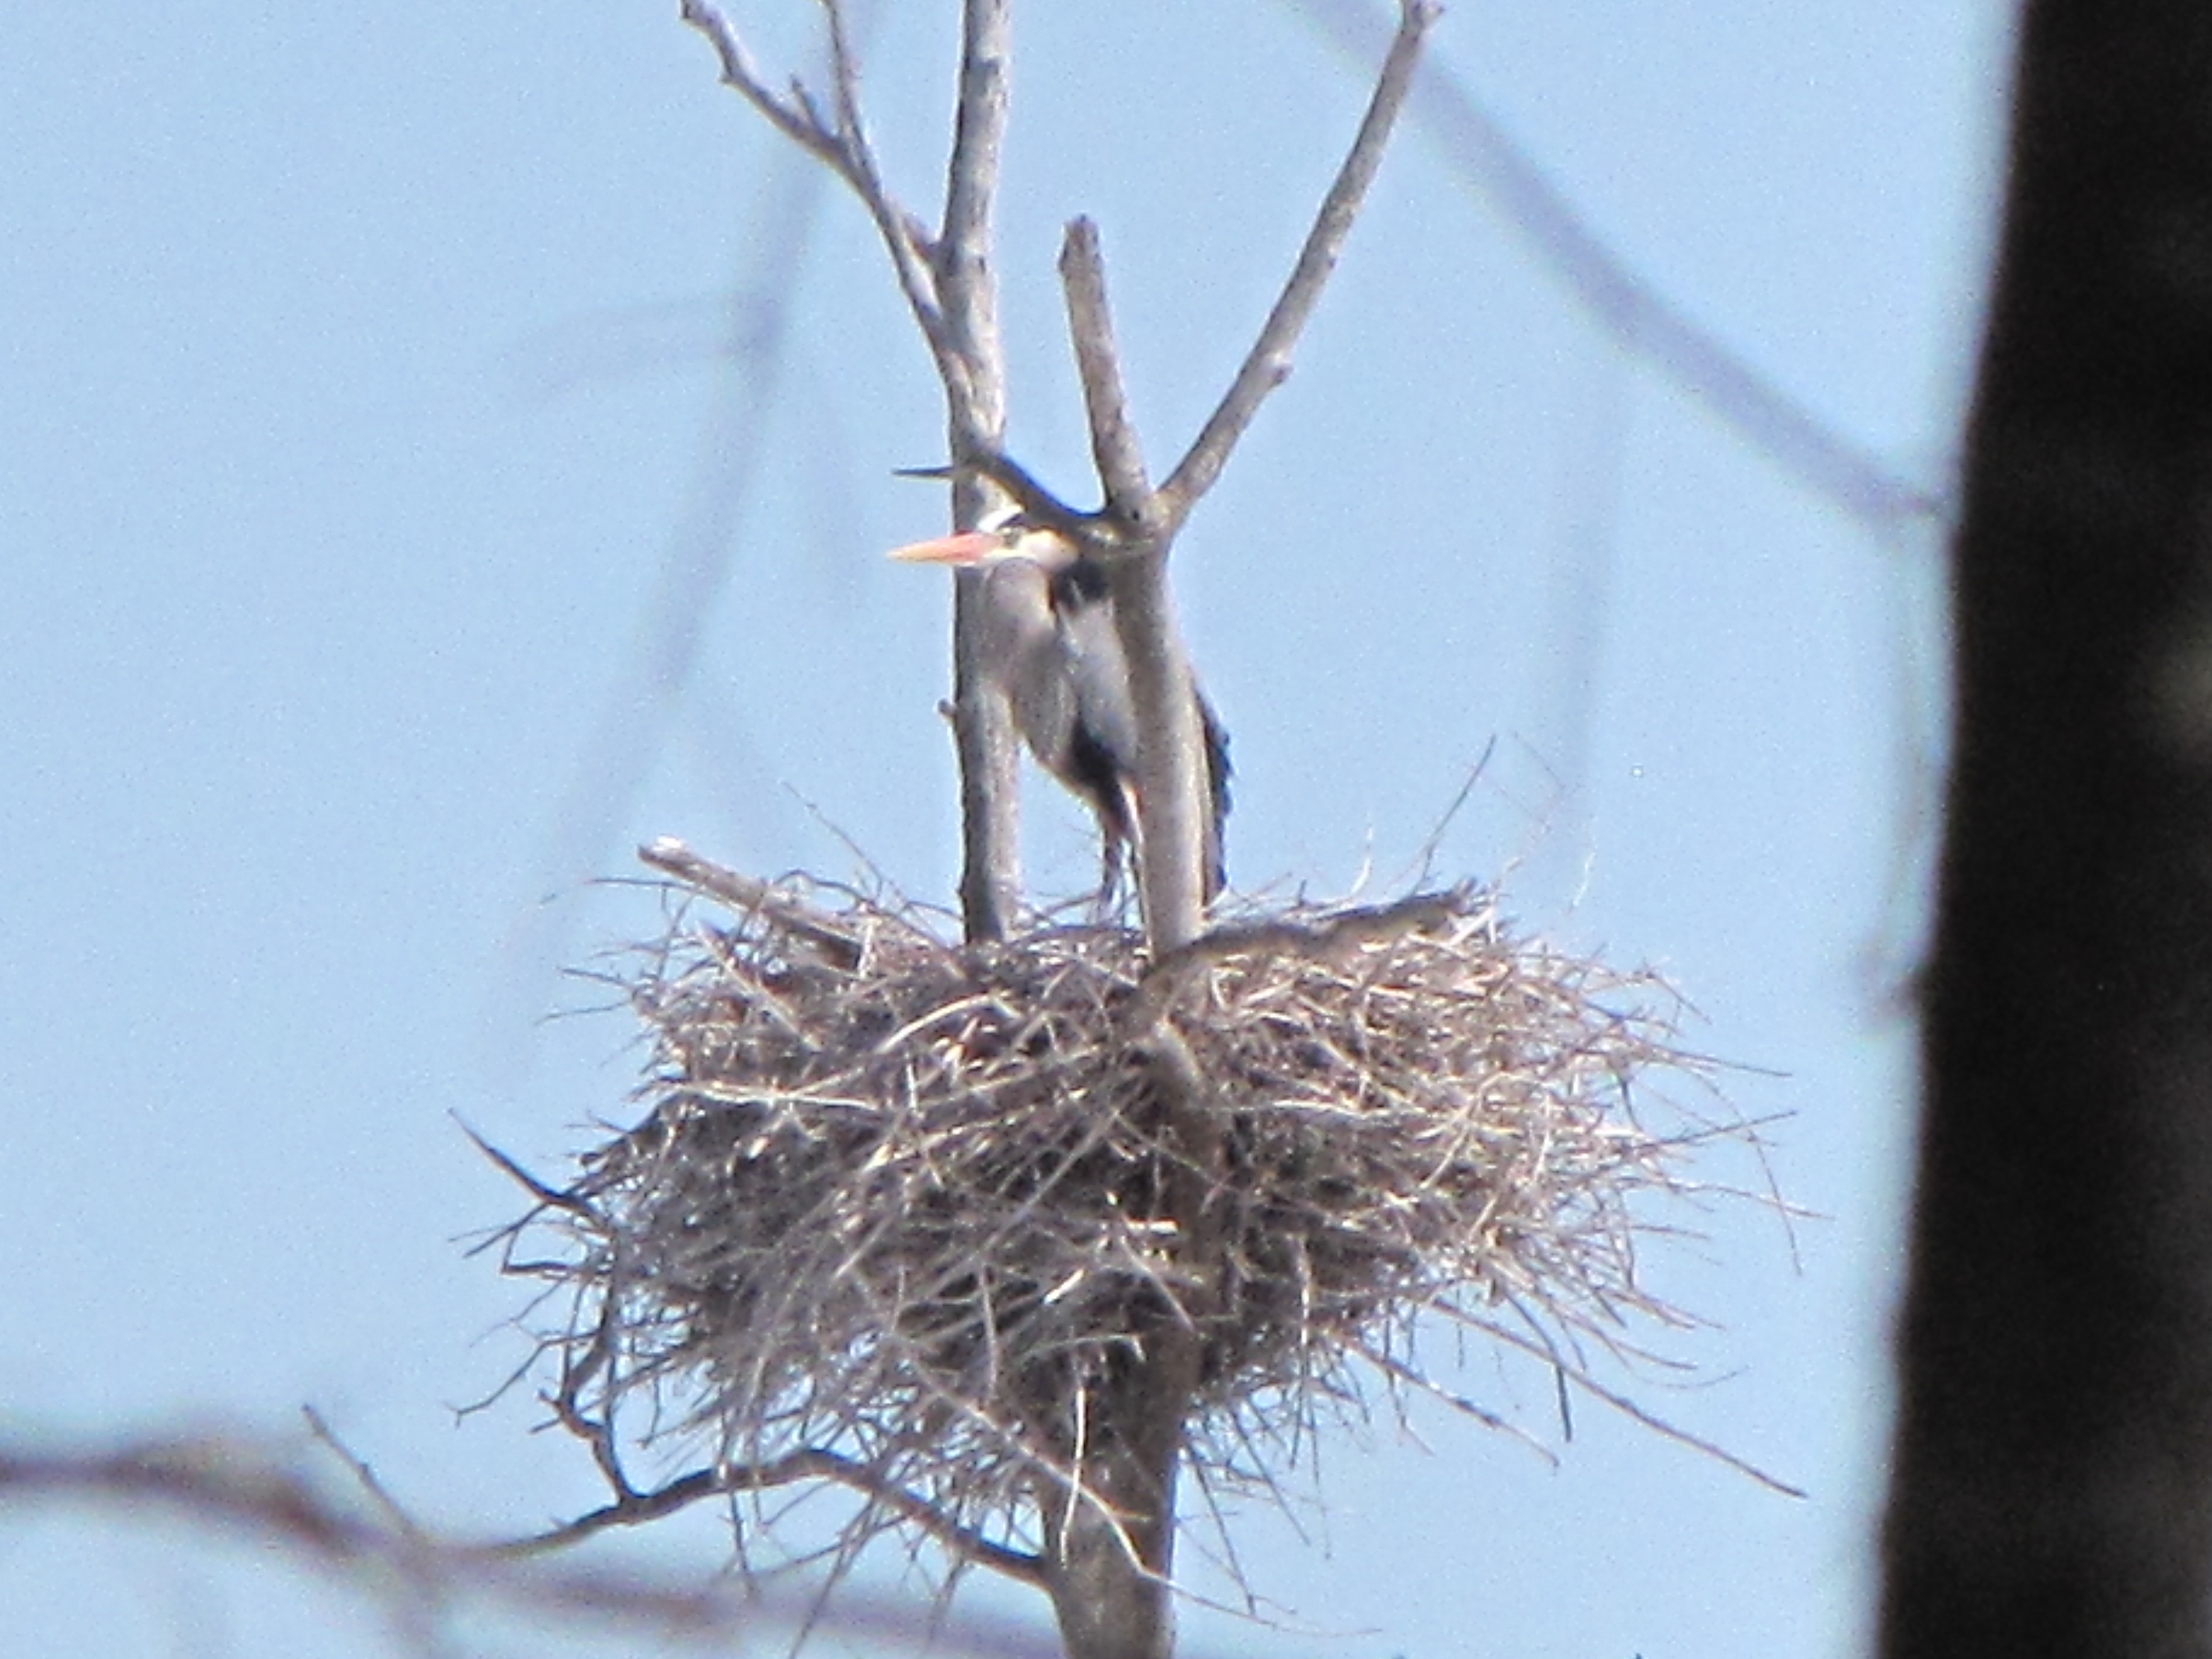 Adult great blue heron at nest (had to zoom in a lot, here!).